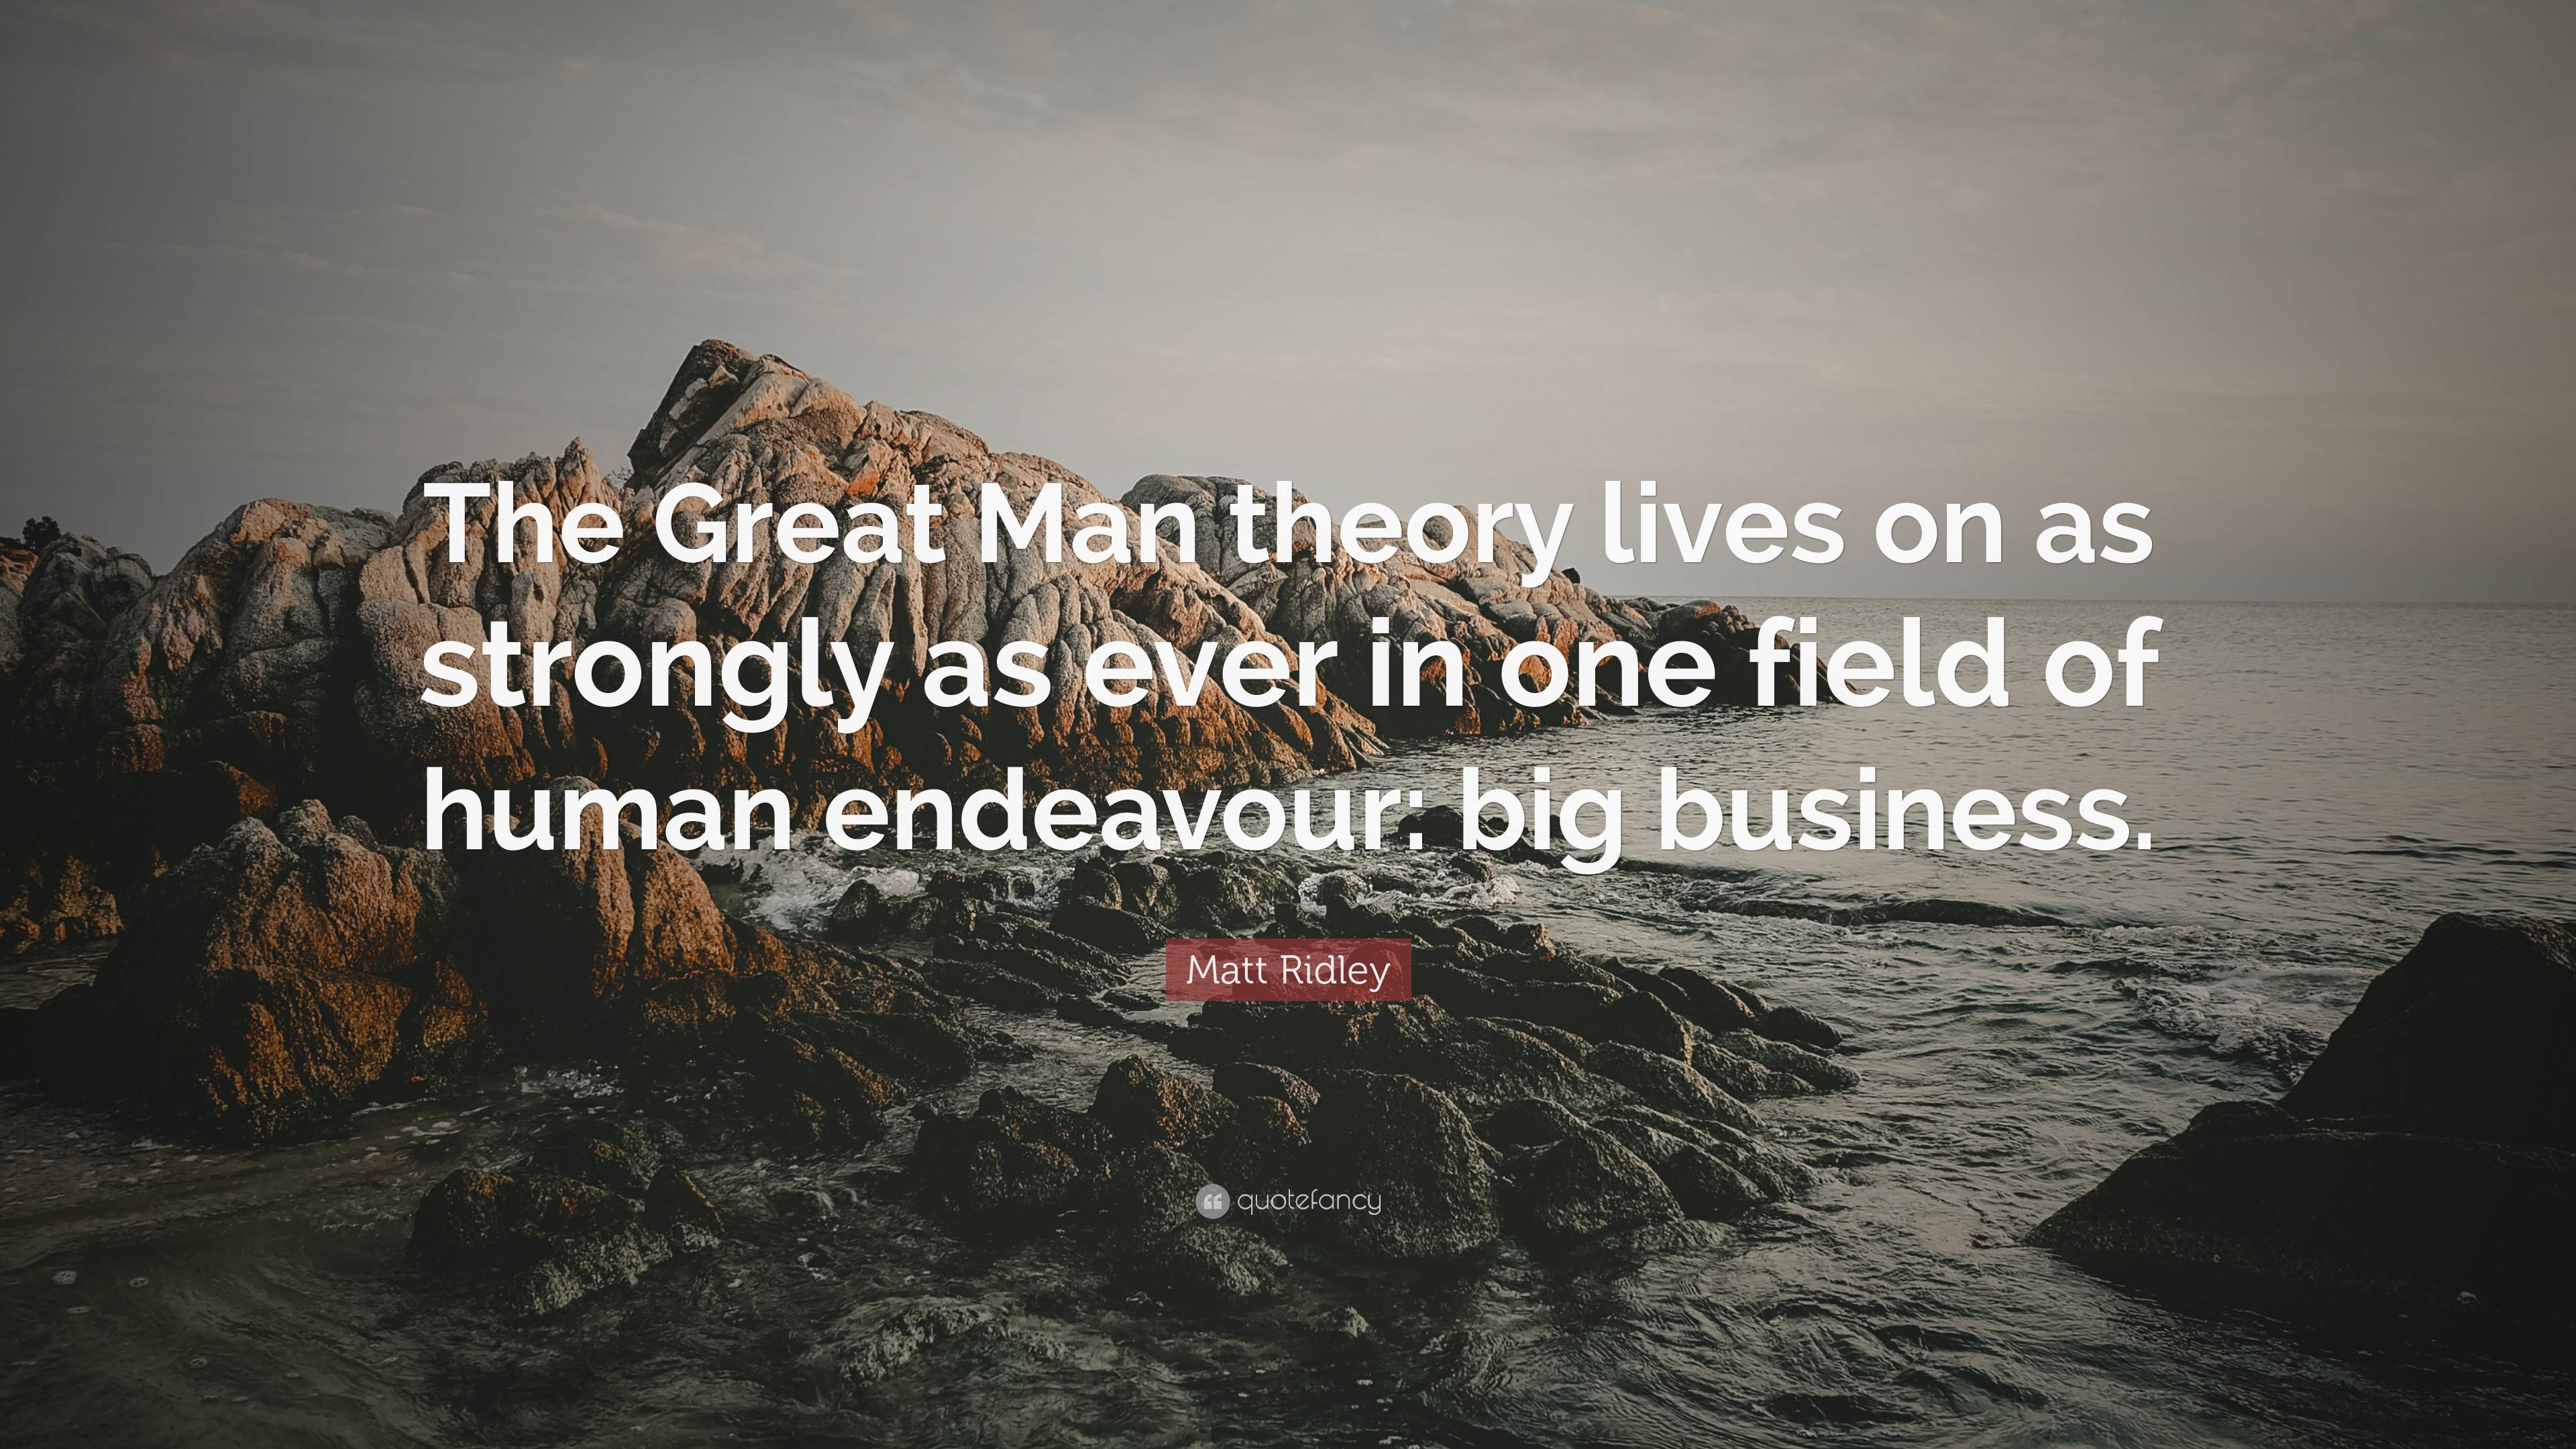 Matt Ridley Quote: “The Great Man theory lives on as strongly as ever in one field